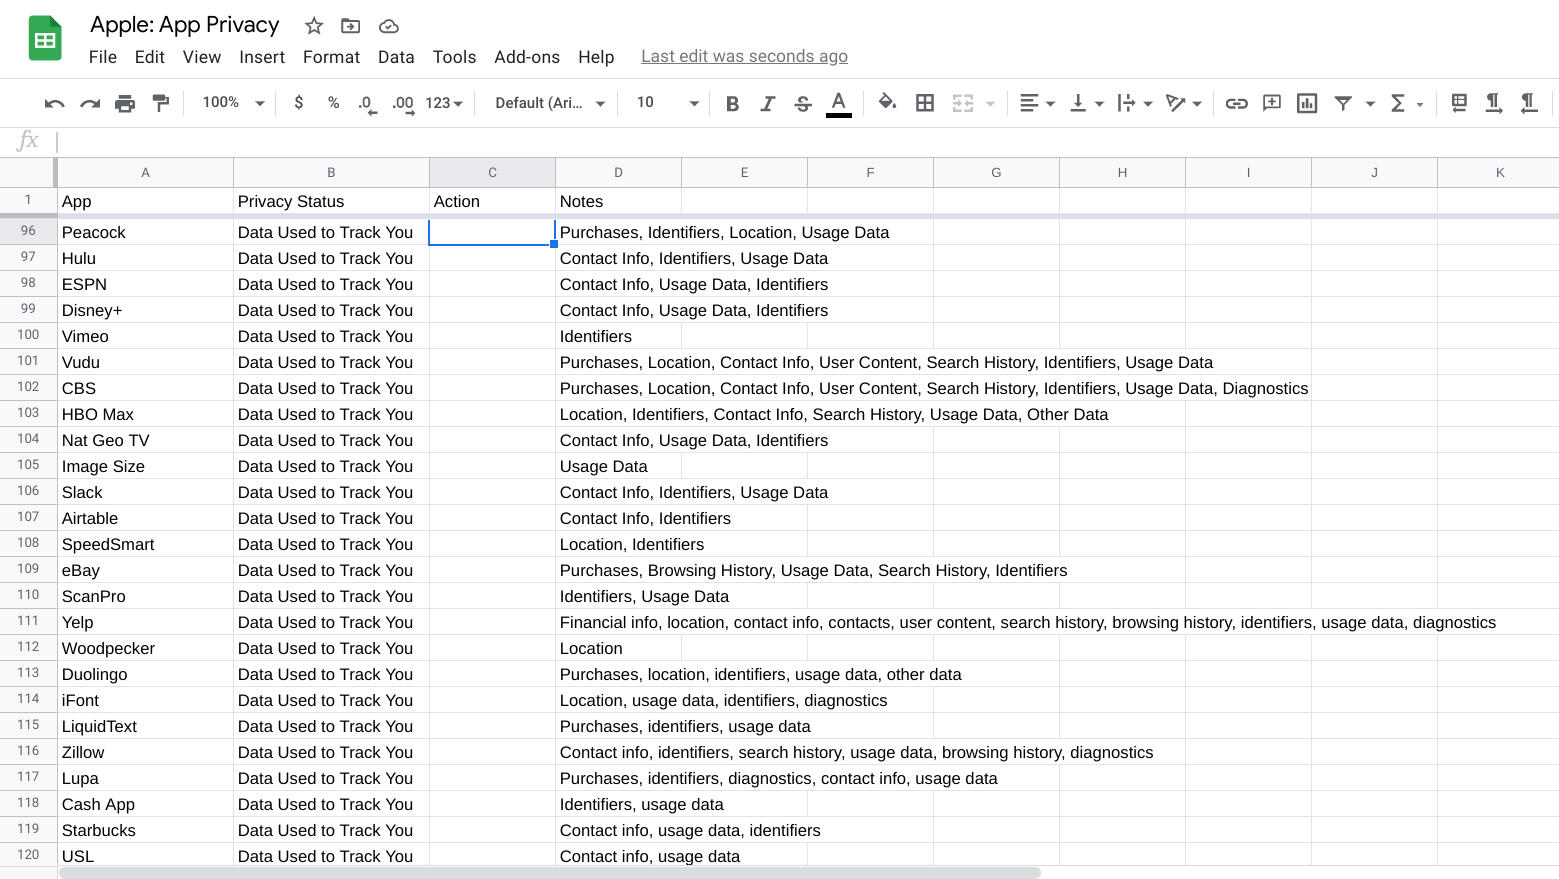 Screenshot of a Google Sheet with every row filled with a different app, along with App Privacy details in columns.